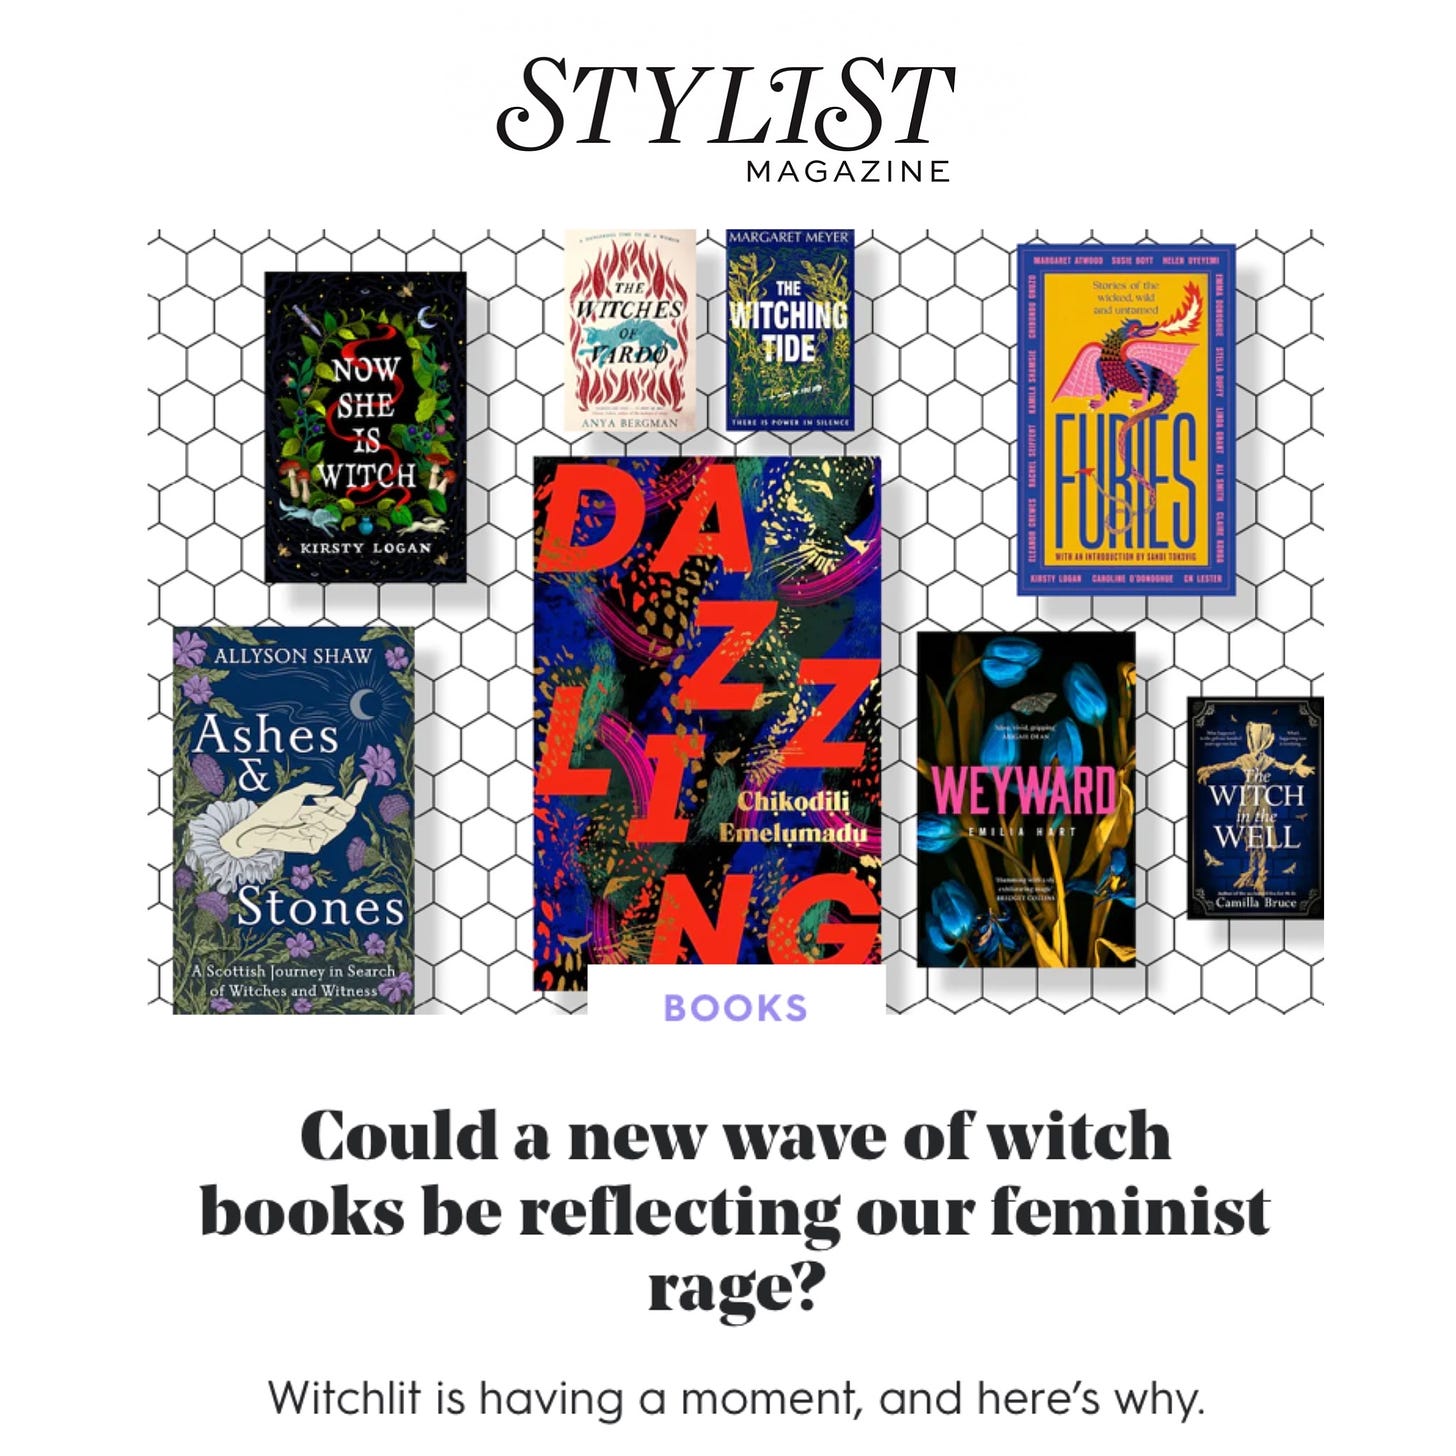 Stylist magazine graphic featuring several "witchy" books, including ashes and stones